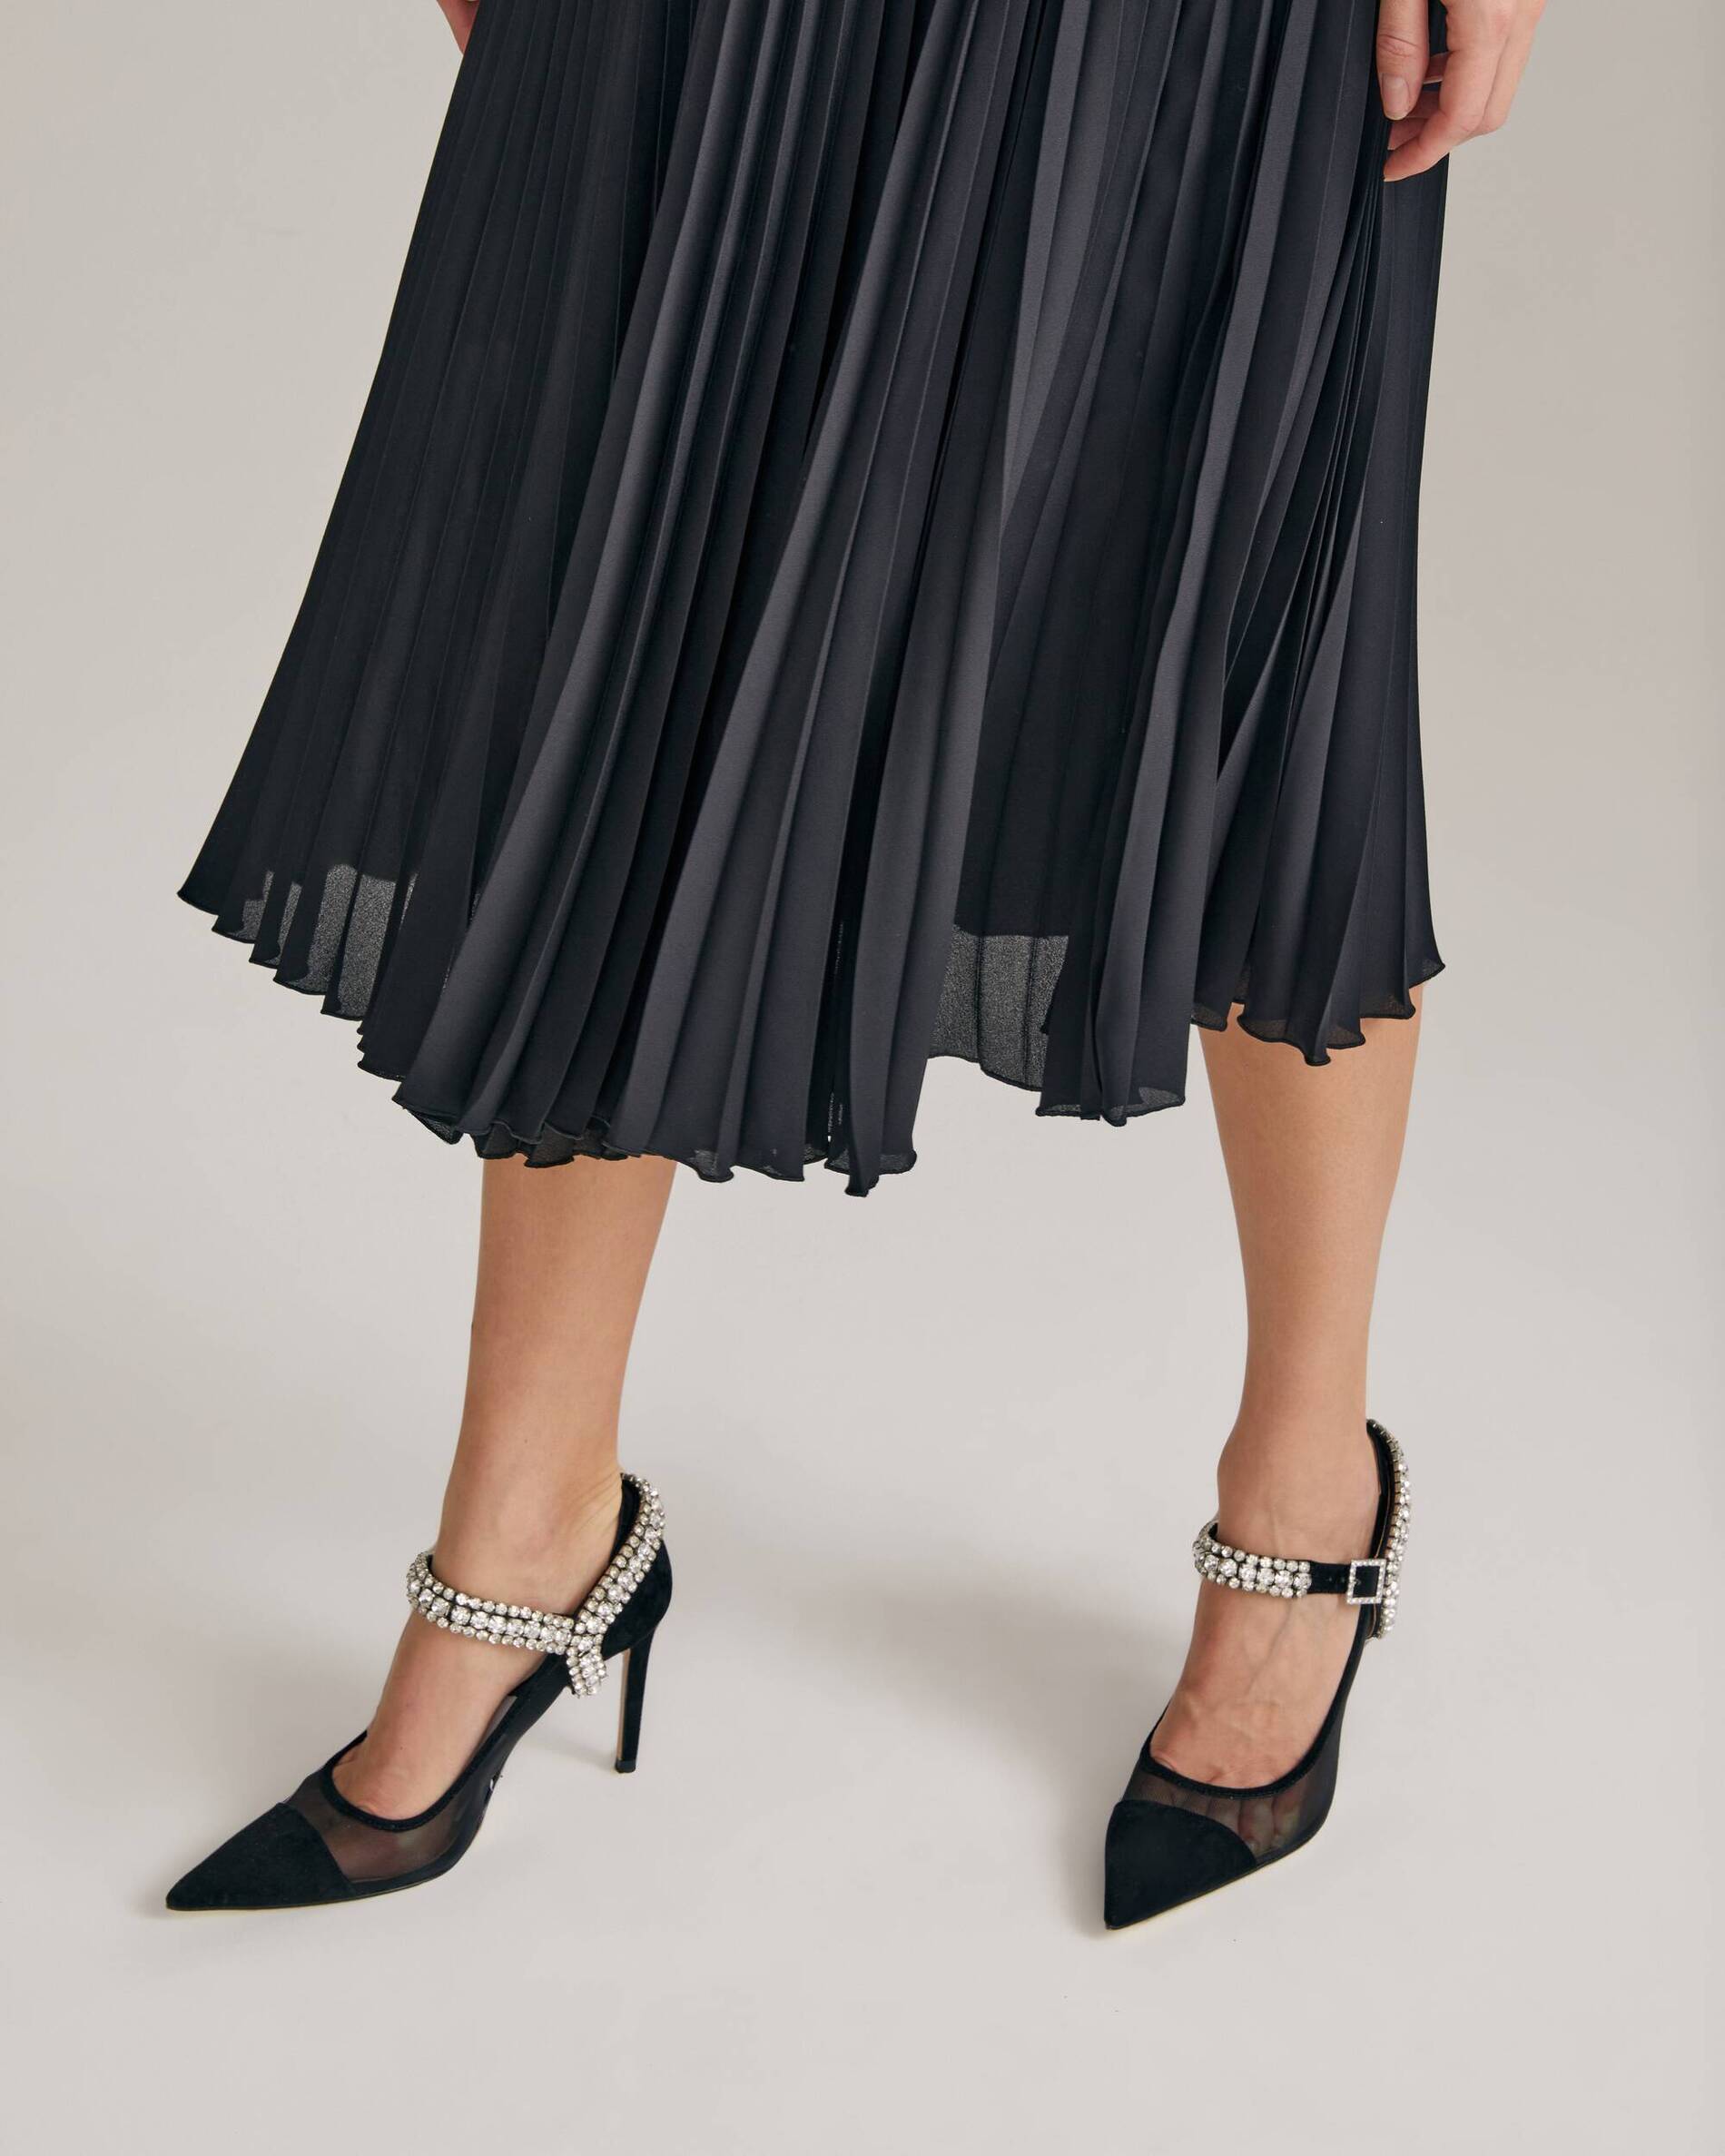 Dress with a pleated skirt